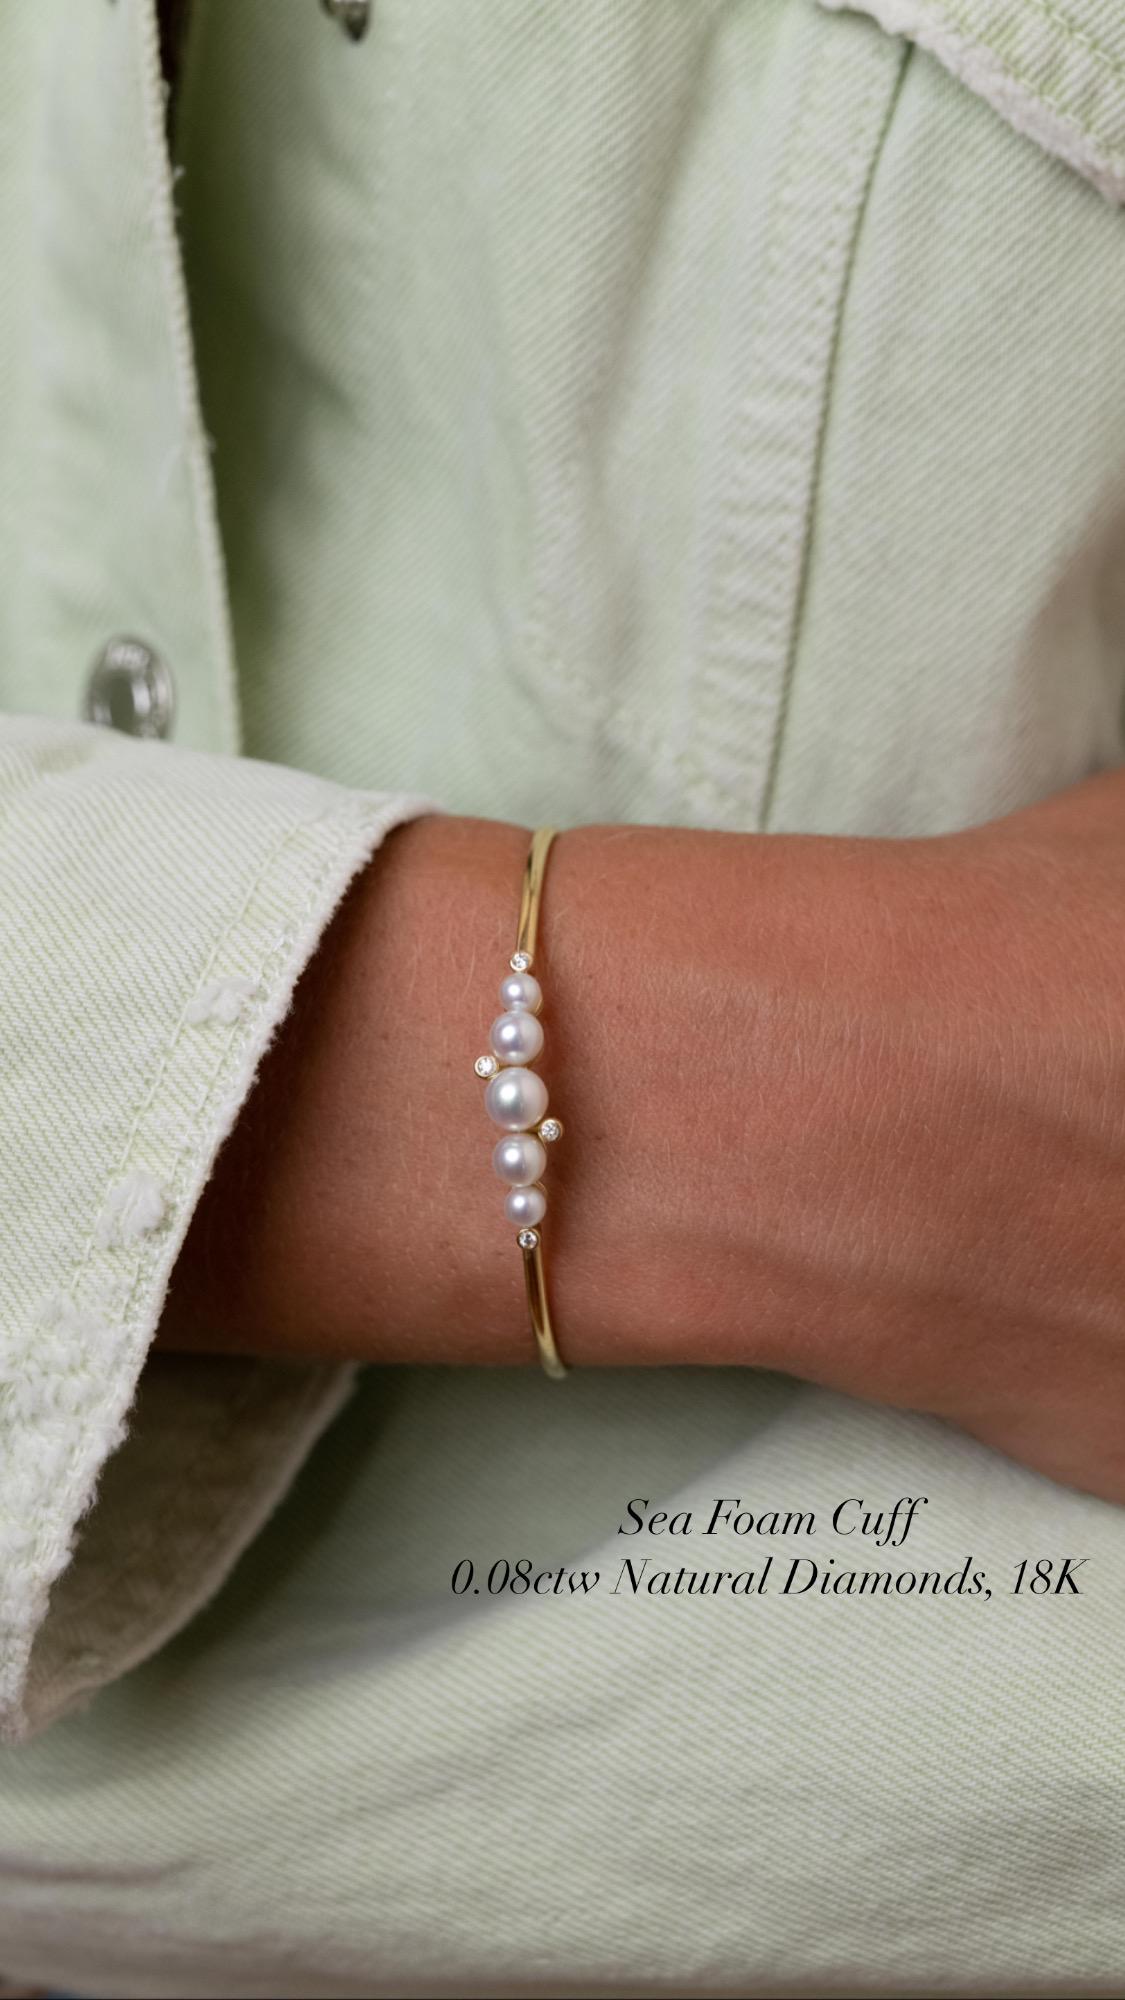 Drawing inspiration from the rising foam in the sea, our sea foam cuff bracelet features lustrous freshwater pearls and glimmering bezel set natural diamonds. Its open design allows it to slip easily on the wrist.

All orders are delivered in a